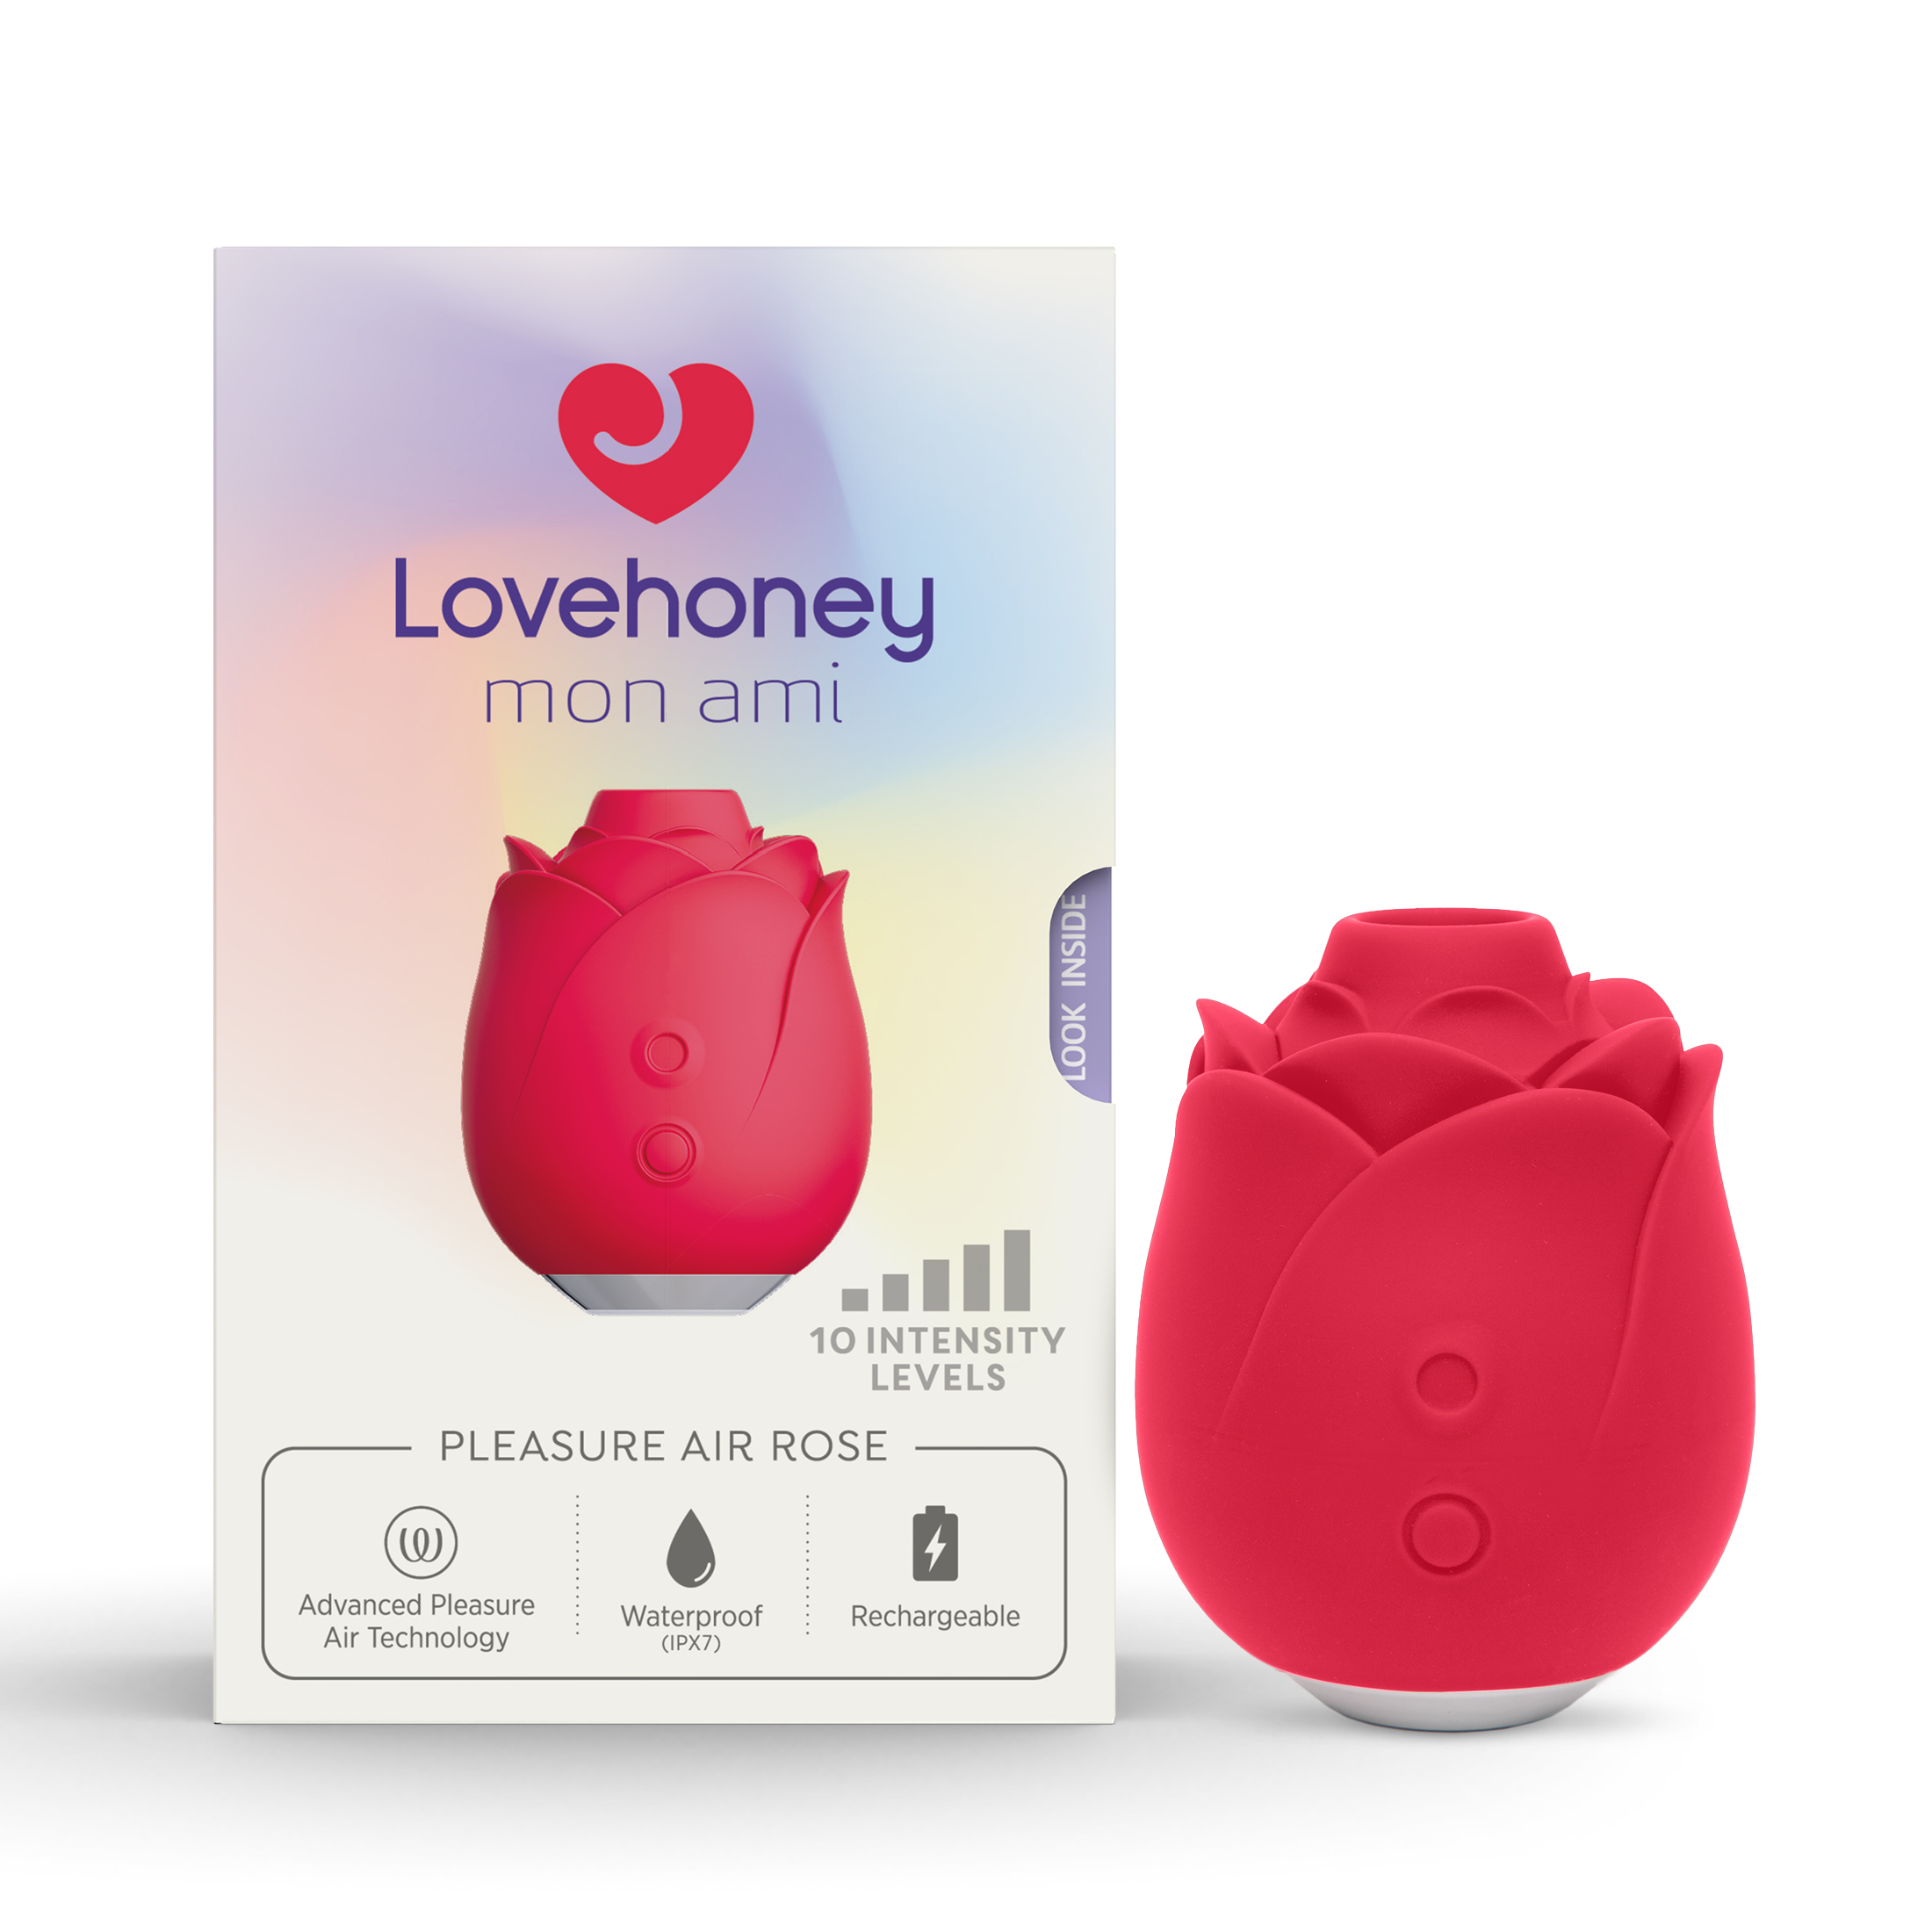 Lovehoney Mon Ami Pleasure Air Suction Vibrating Rose, Red - image 1 of 11